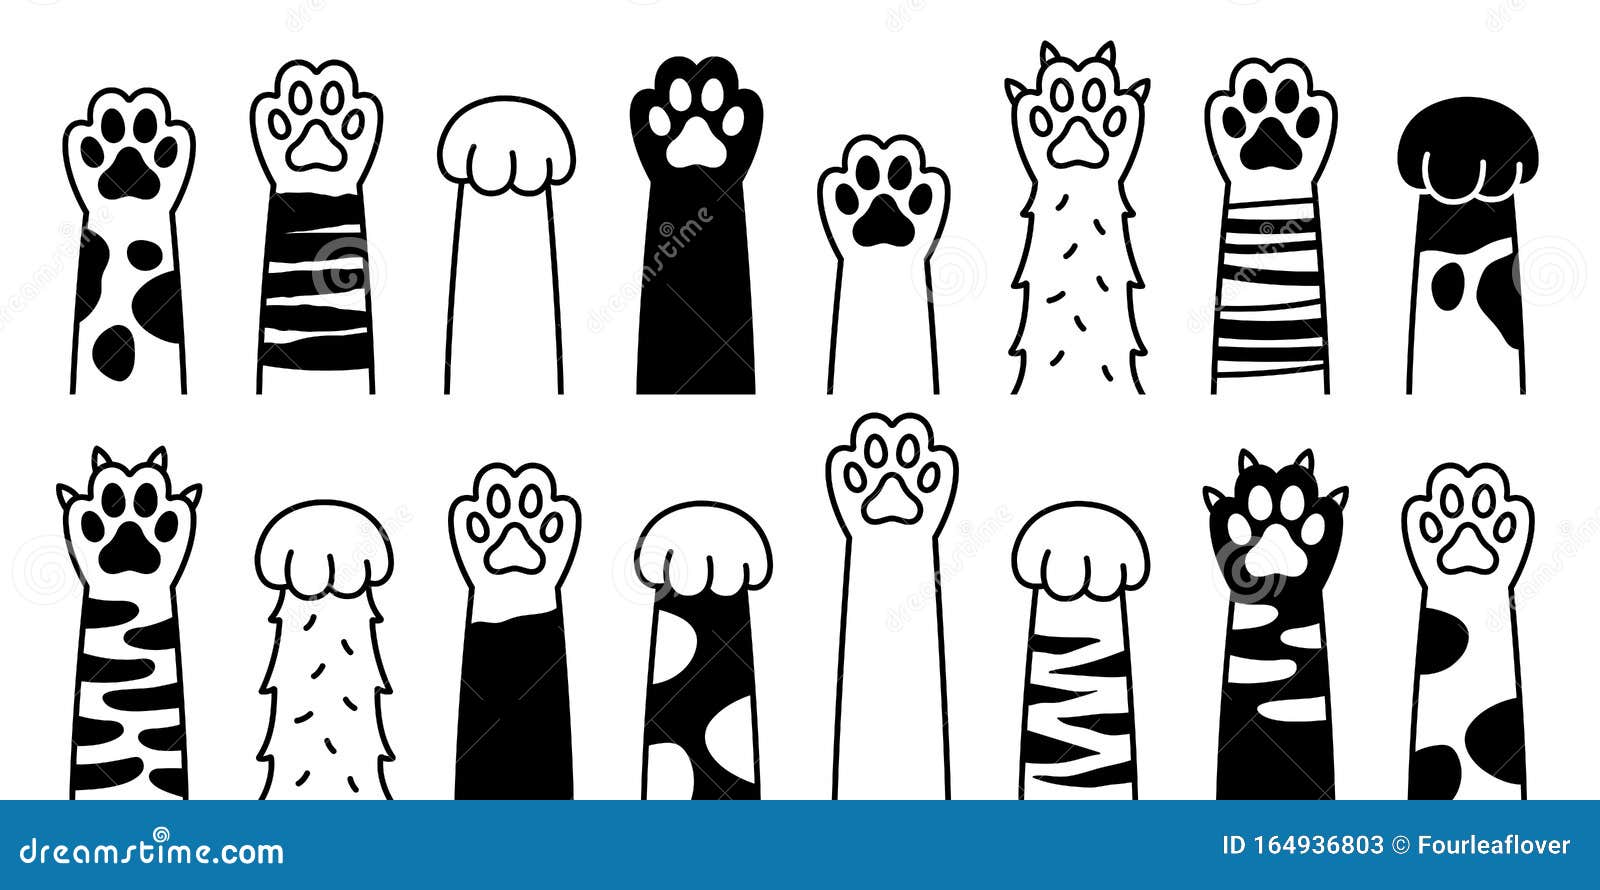 Sporvogn brevpapir to Cat Paw Vector Dog Paw Cat Breed Vector Doodle Illustration Character Stock  Vector - Illustration of doodle, icon: 164936803